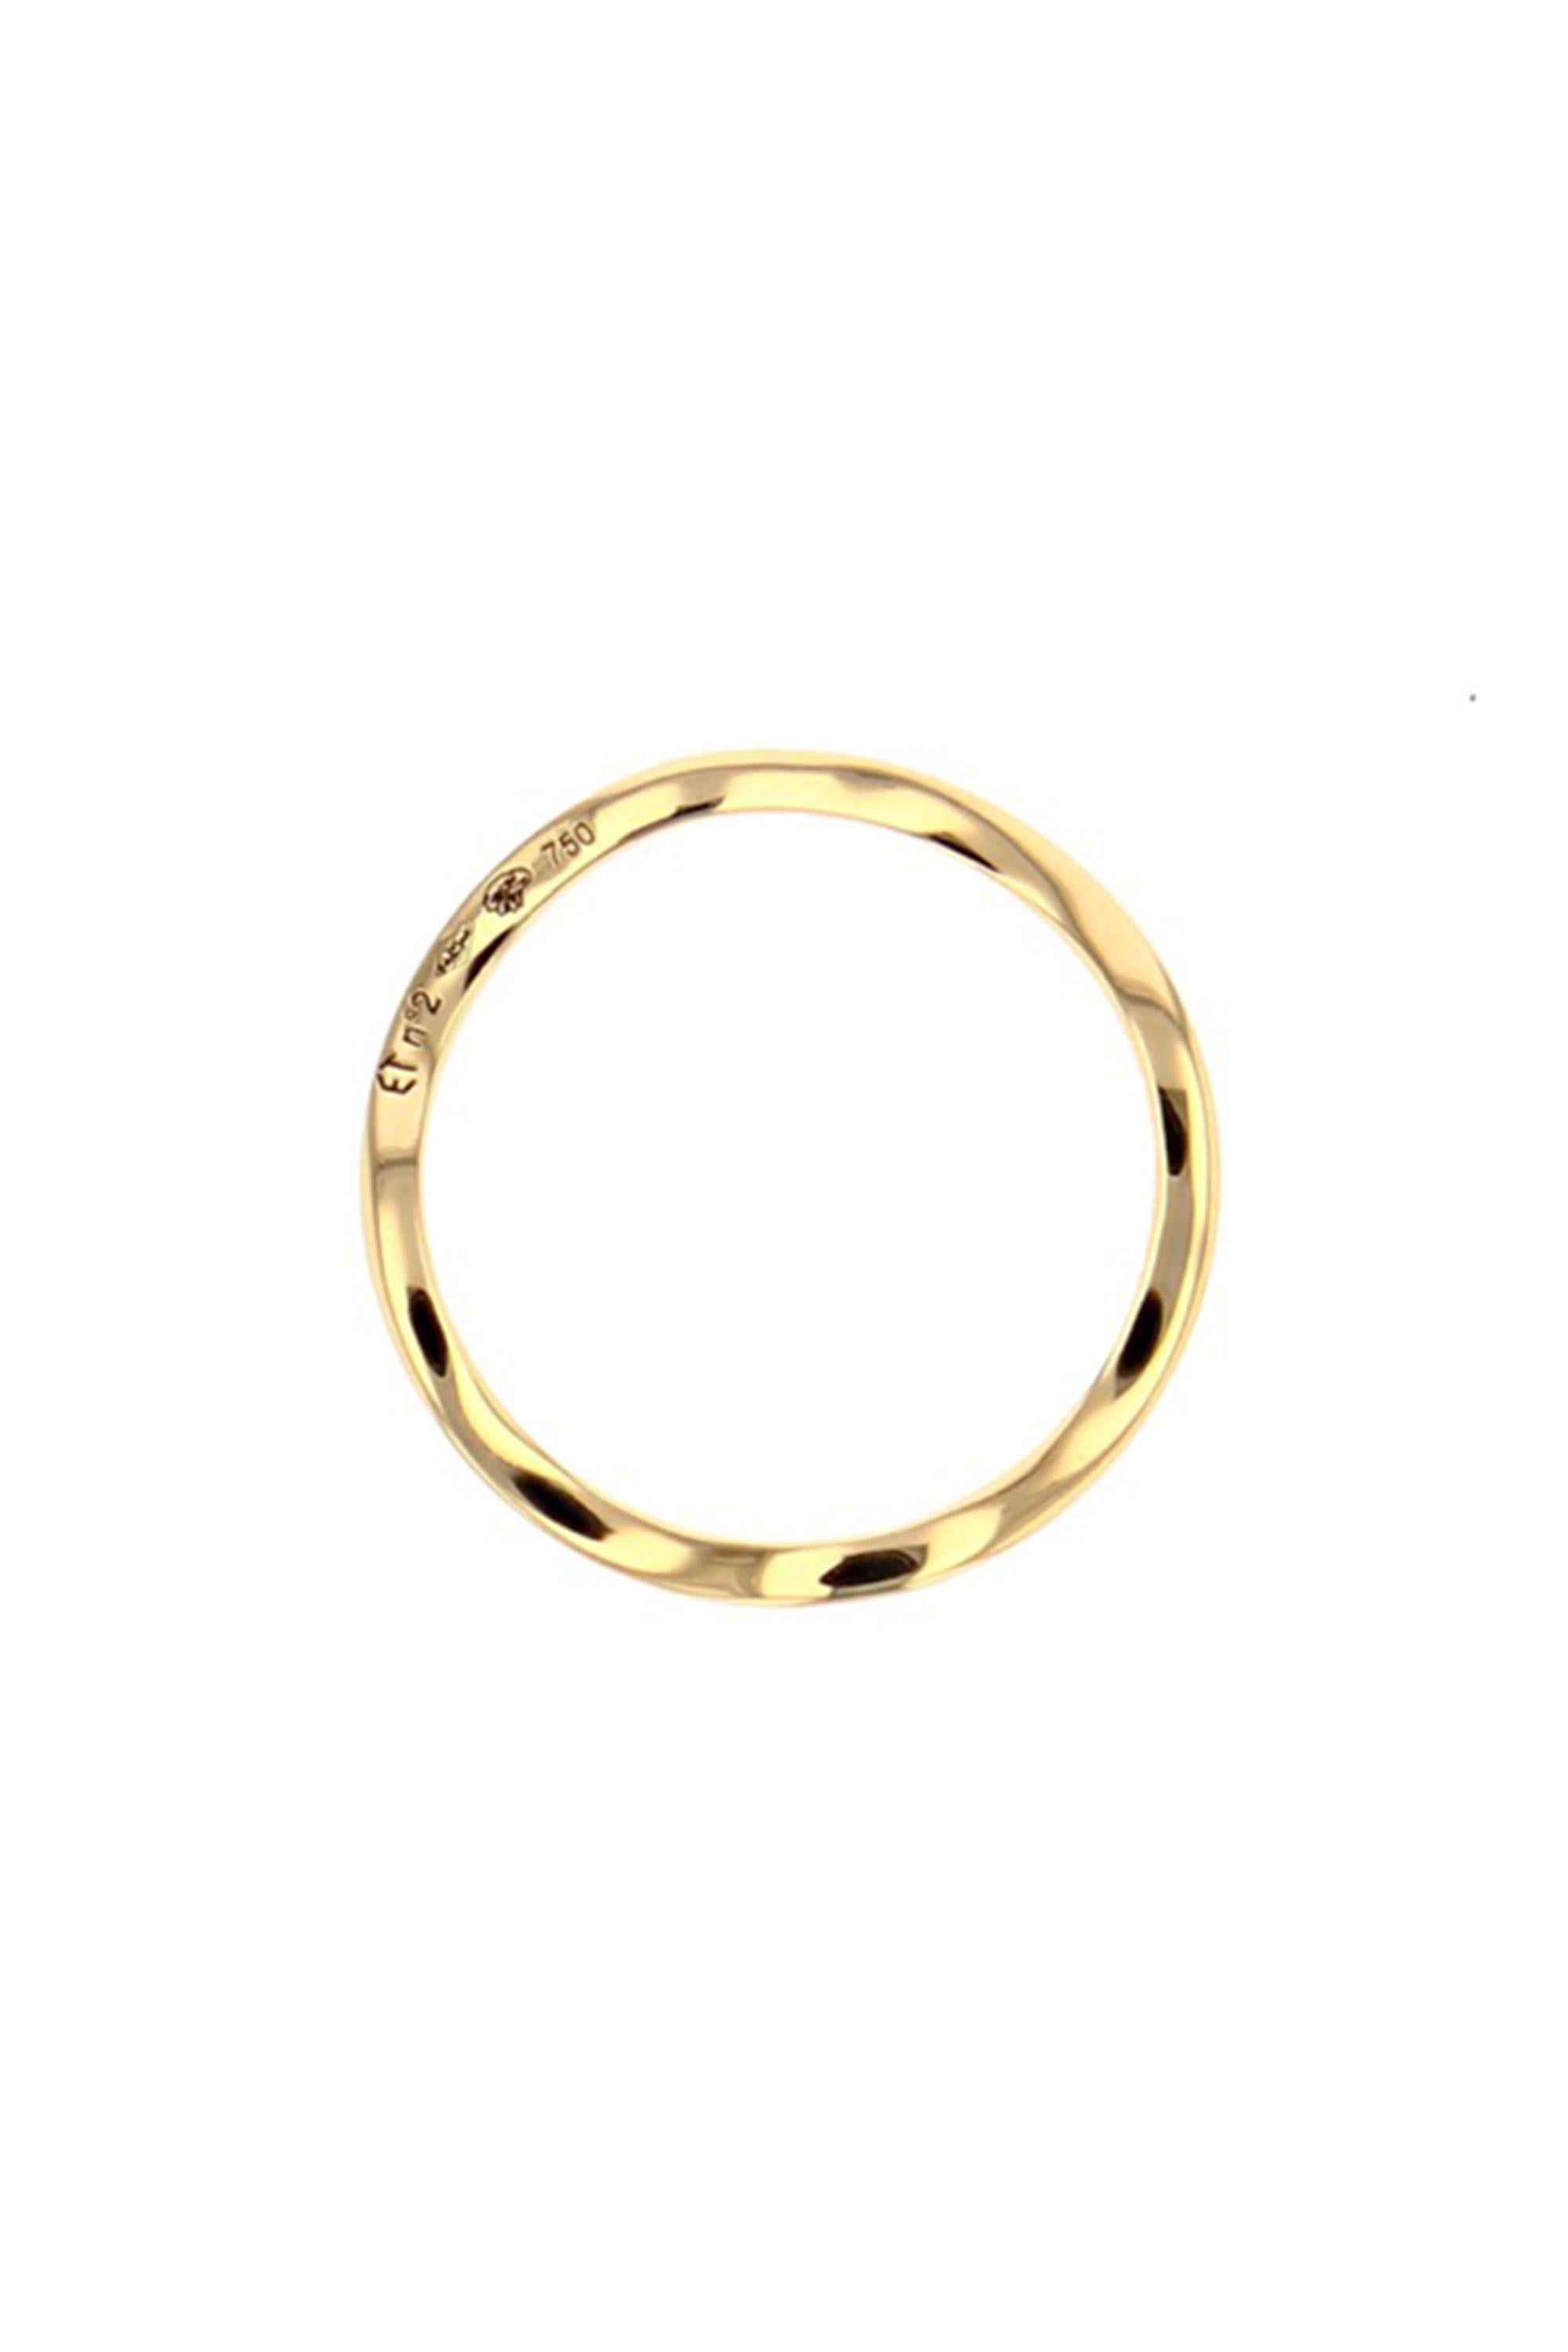 Neoclassical Stylet Ring in 18k Yellow Gold by Elie Top For Sale